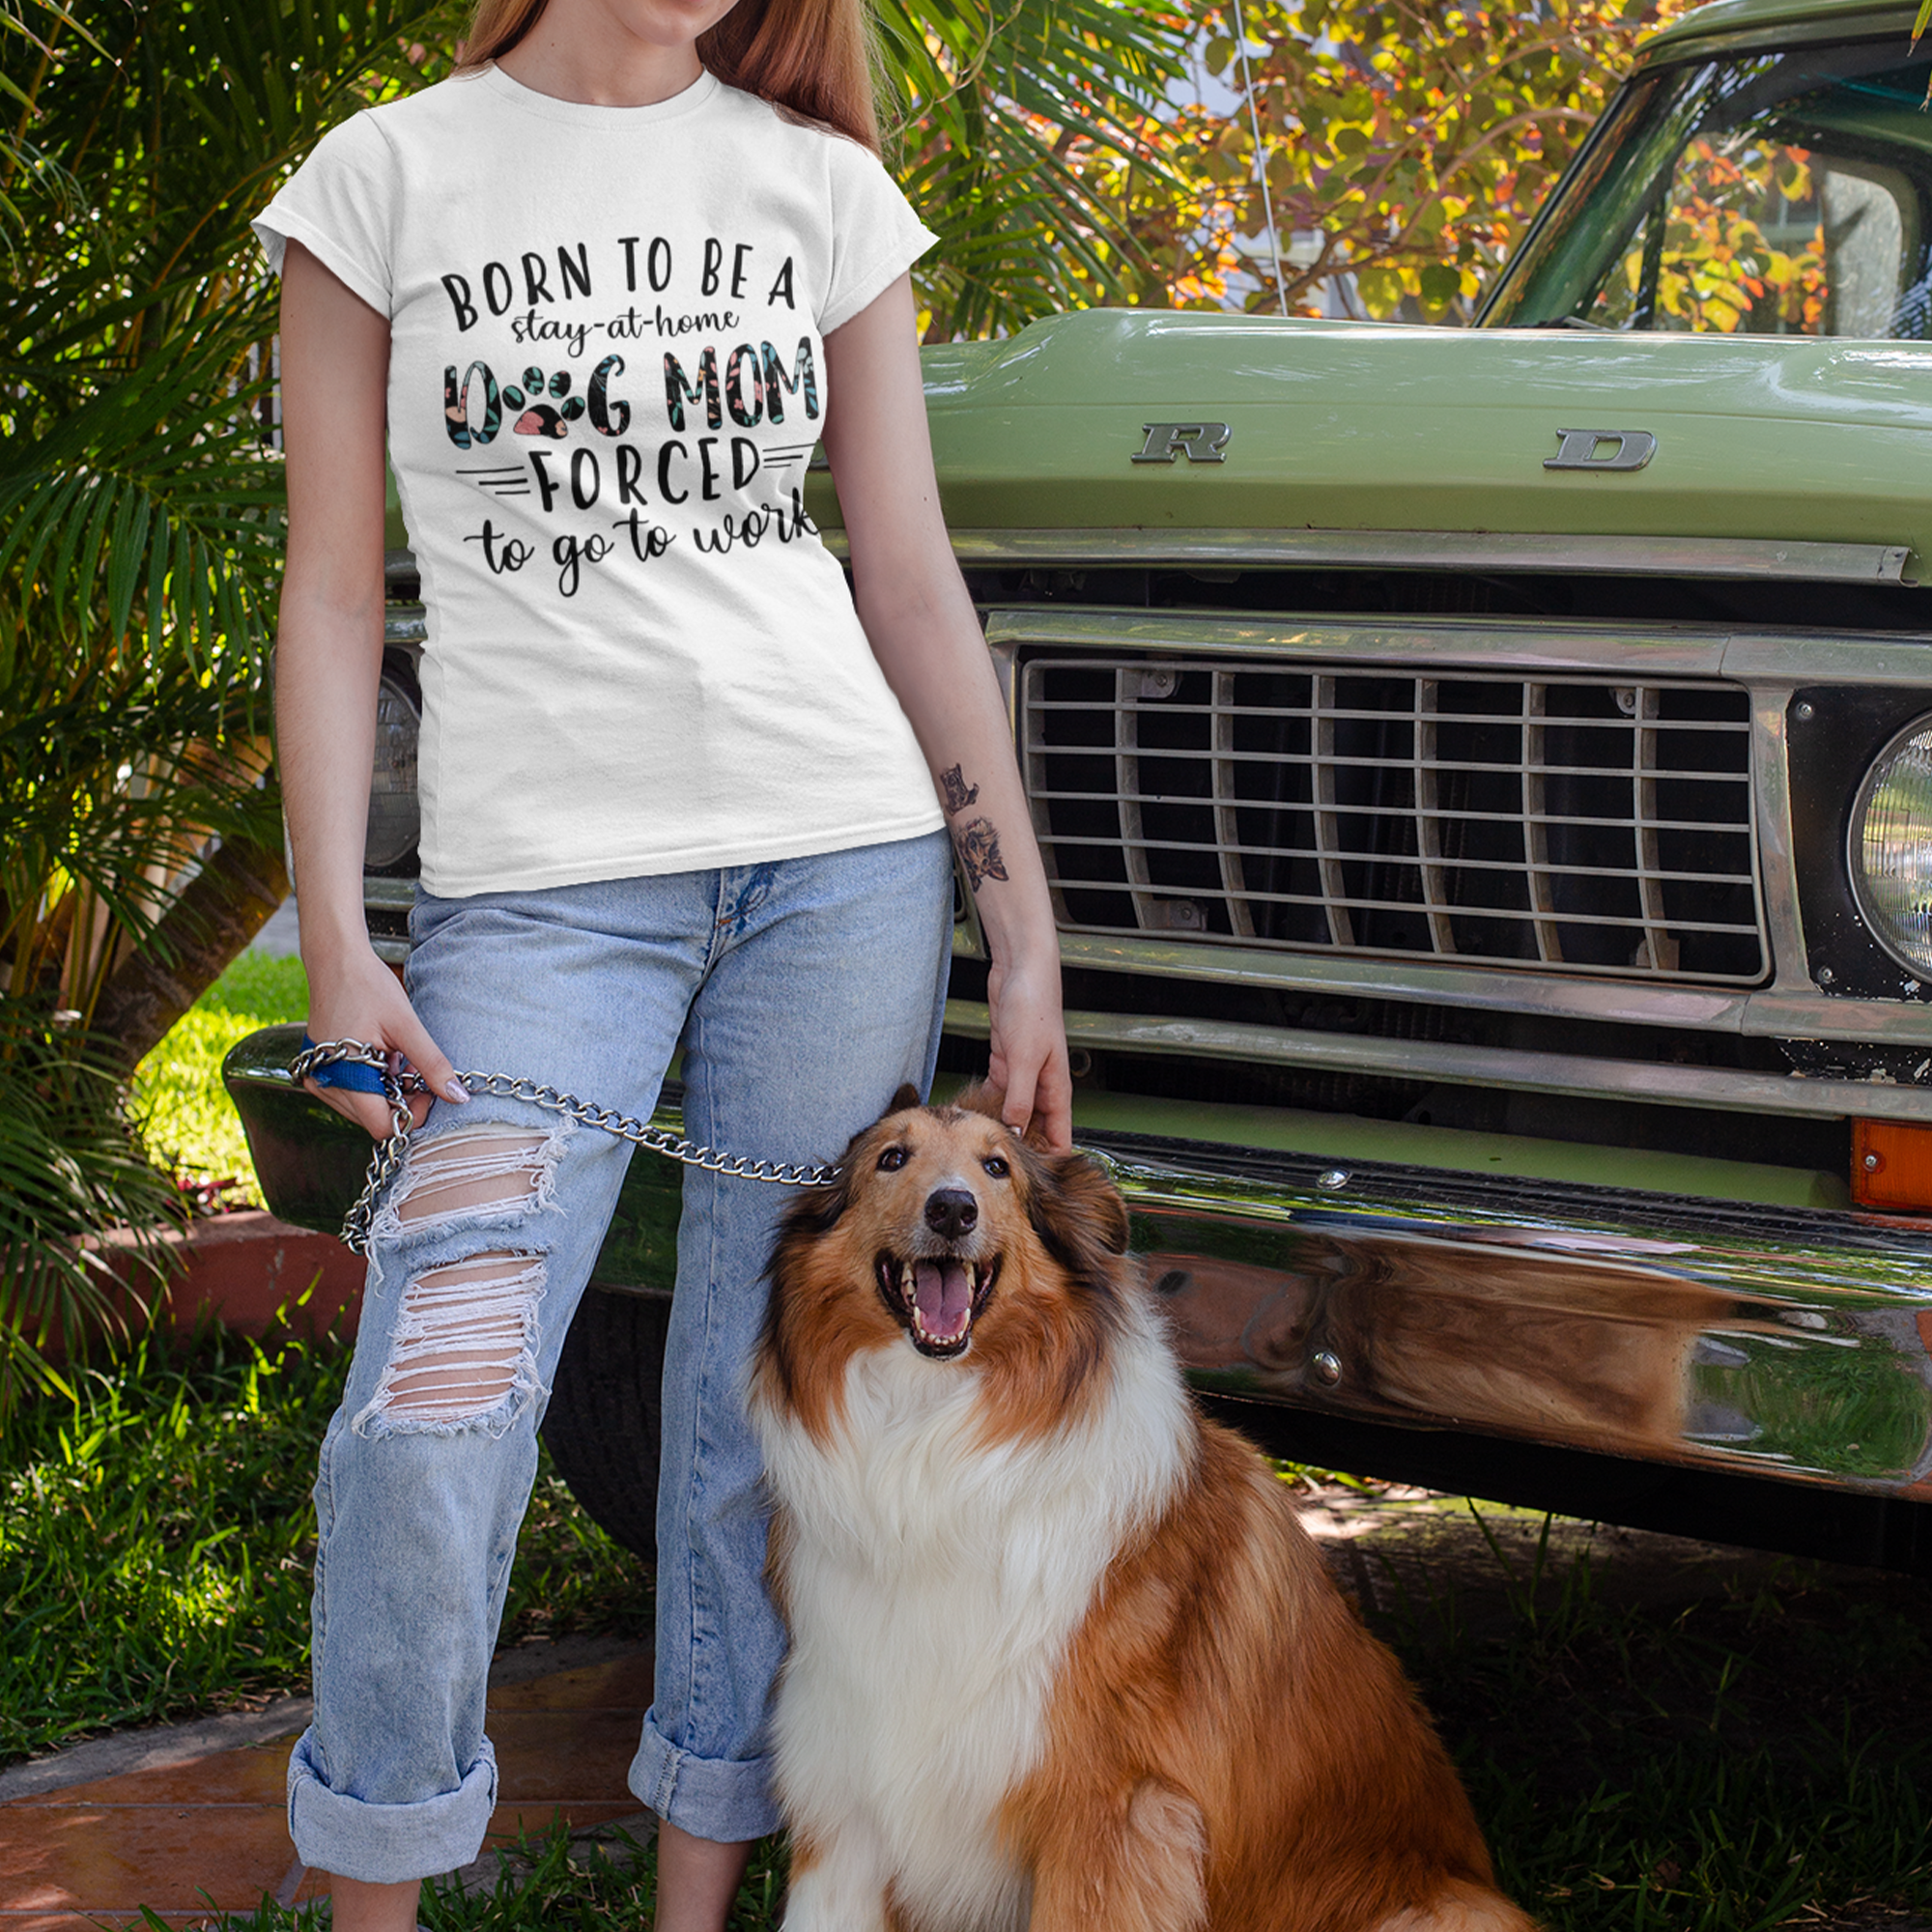 Dog Mom Work tshirt, Born To Be Stay At Home Dog Mom Forced To Go To Work Shirt, Mother's Day Gifts, Dog Mom Gift